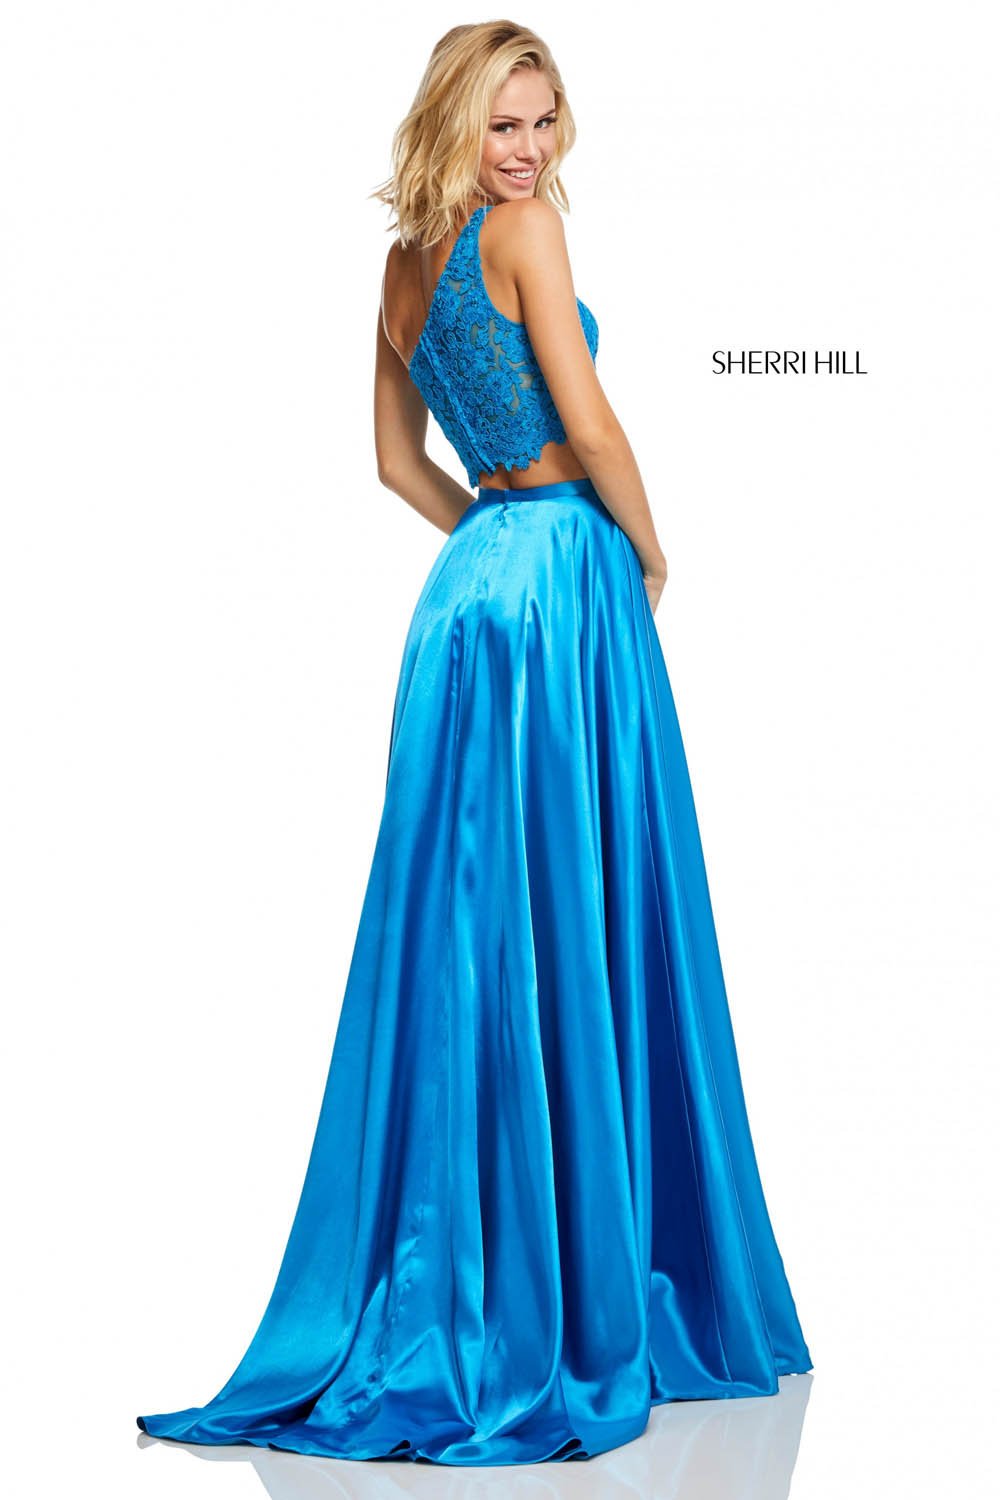 Sherri Hill 52730 dress images in these colors: Red, Rose, Lilac, Teal, Yellow, Black Red, Peacock, Ivory Mocha, Wine.